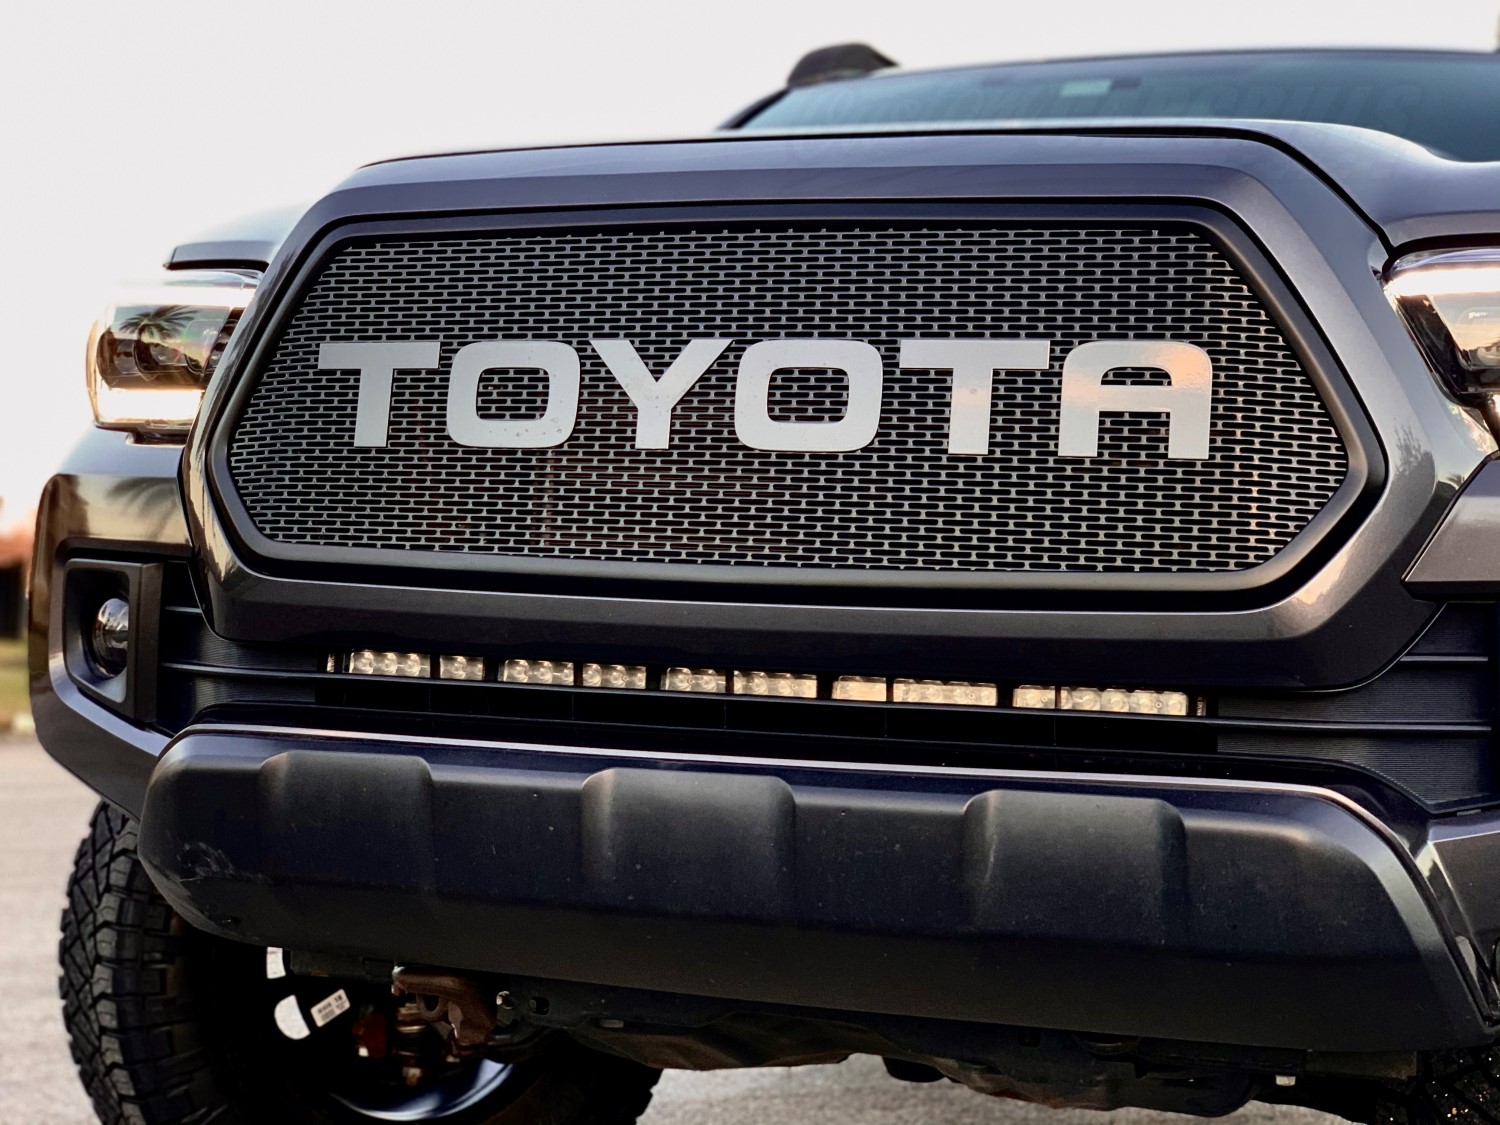 2016-17 Toyota Tacoma Customization: Custom Slotted Grille and Magnetic Gray Metallic Letters for a Unique Look